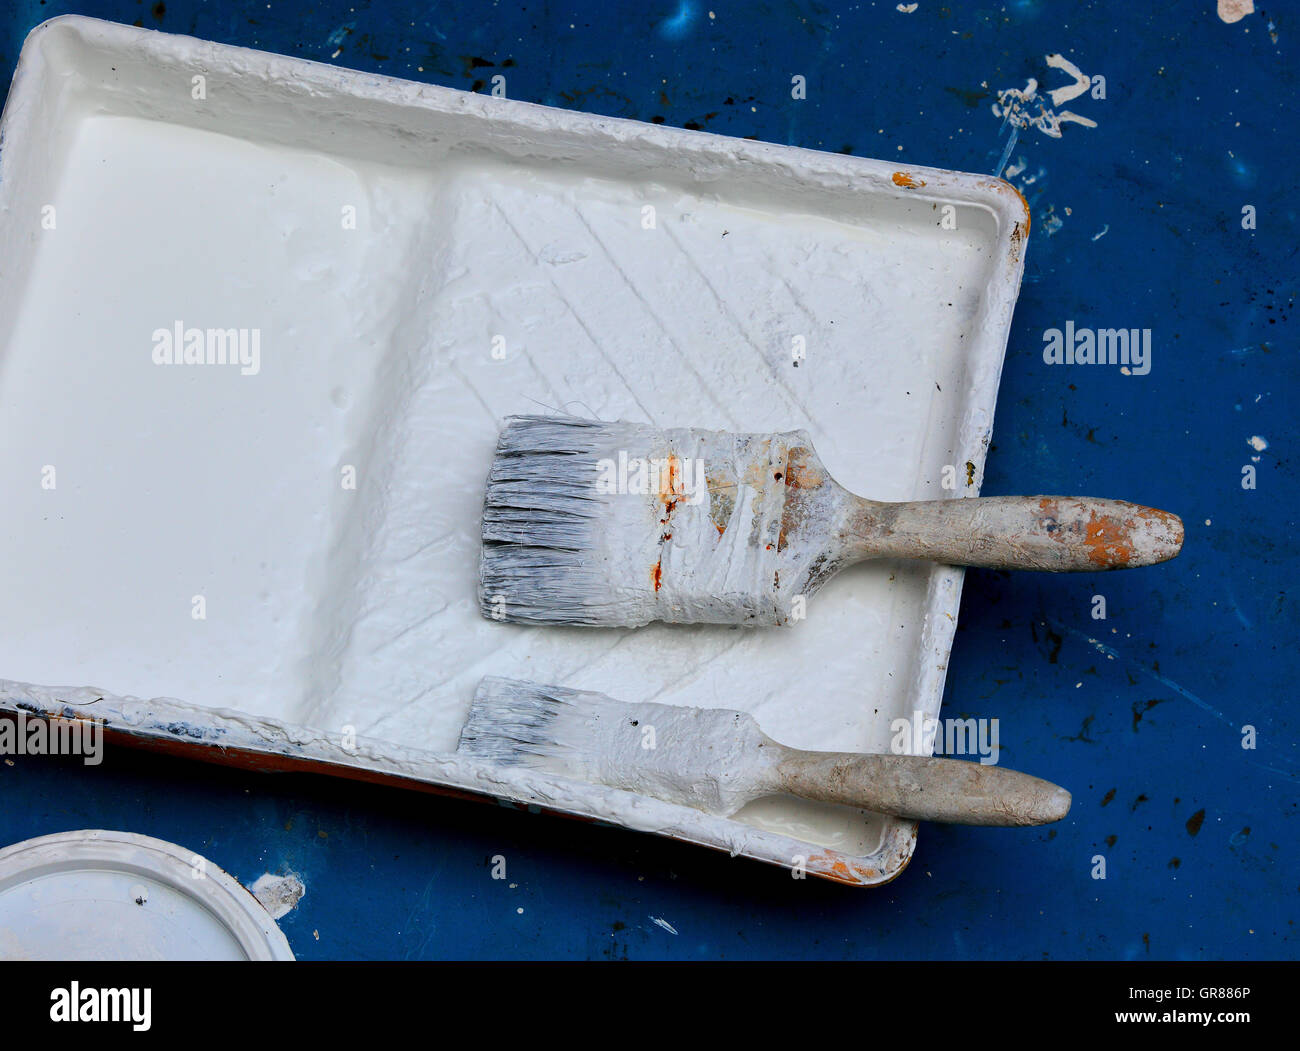 Two white paintbrushes lie in a white colour tub on blue subsoil Stock Photo